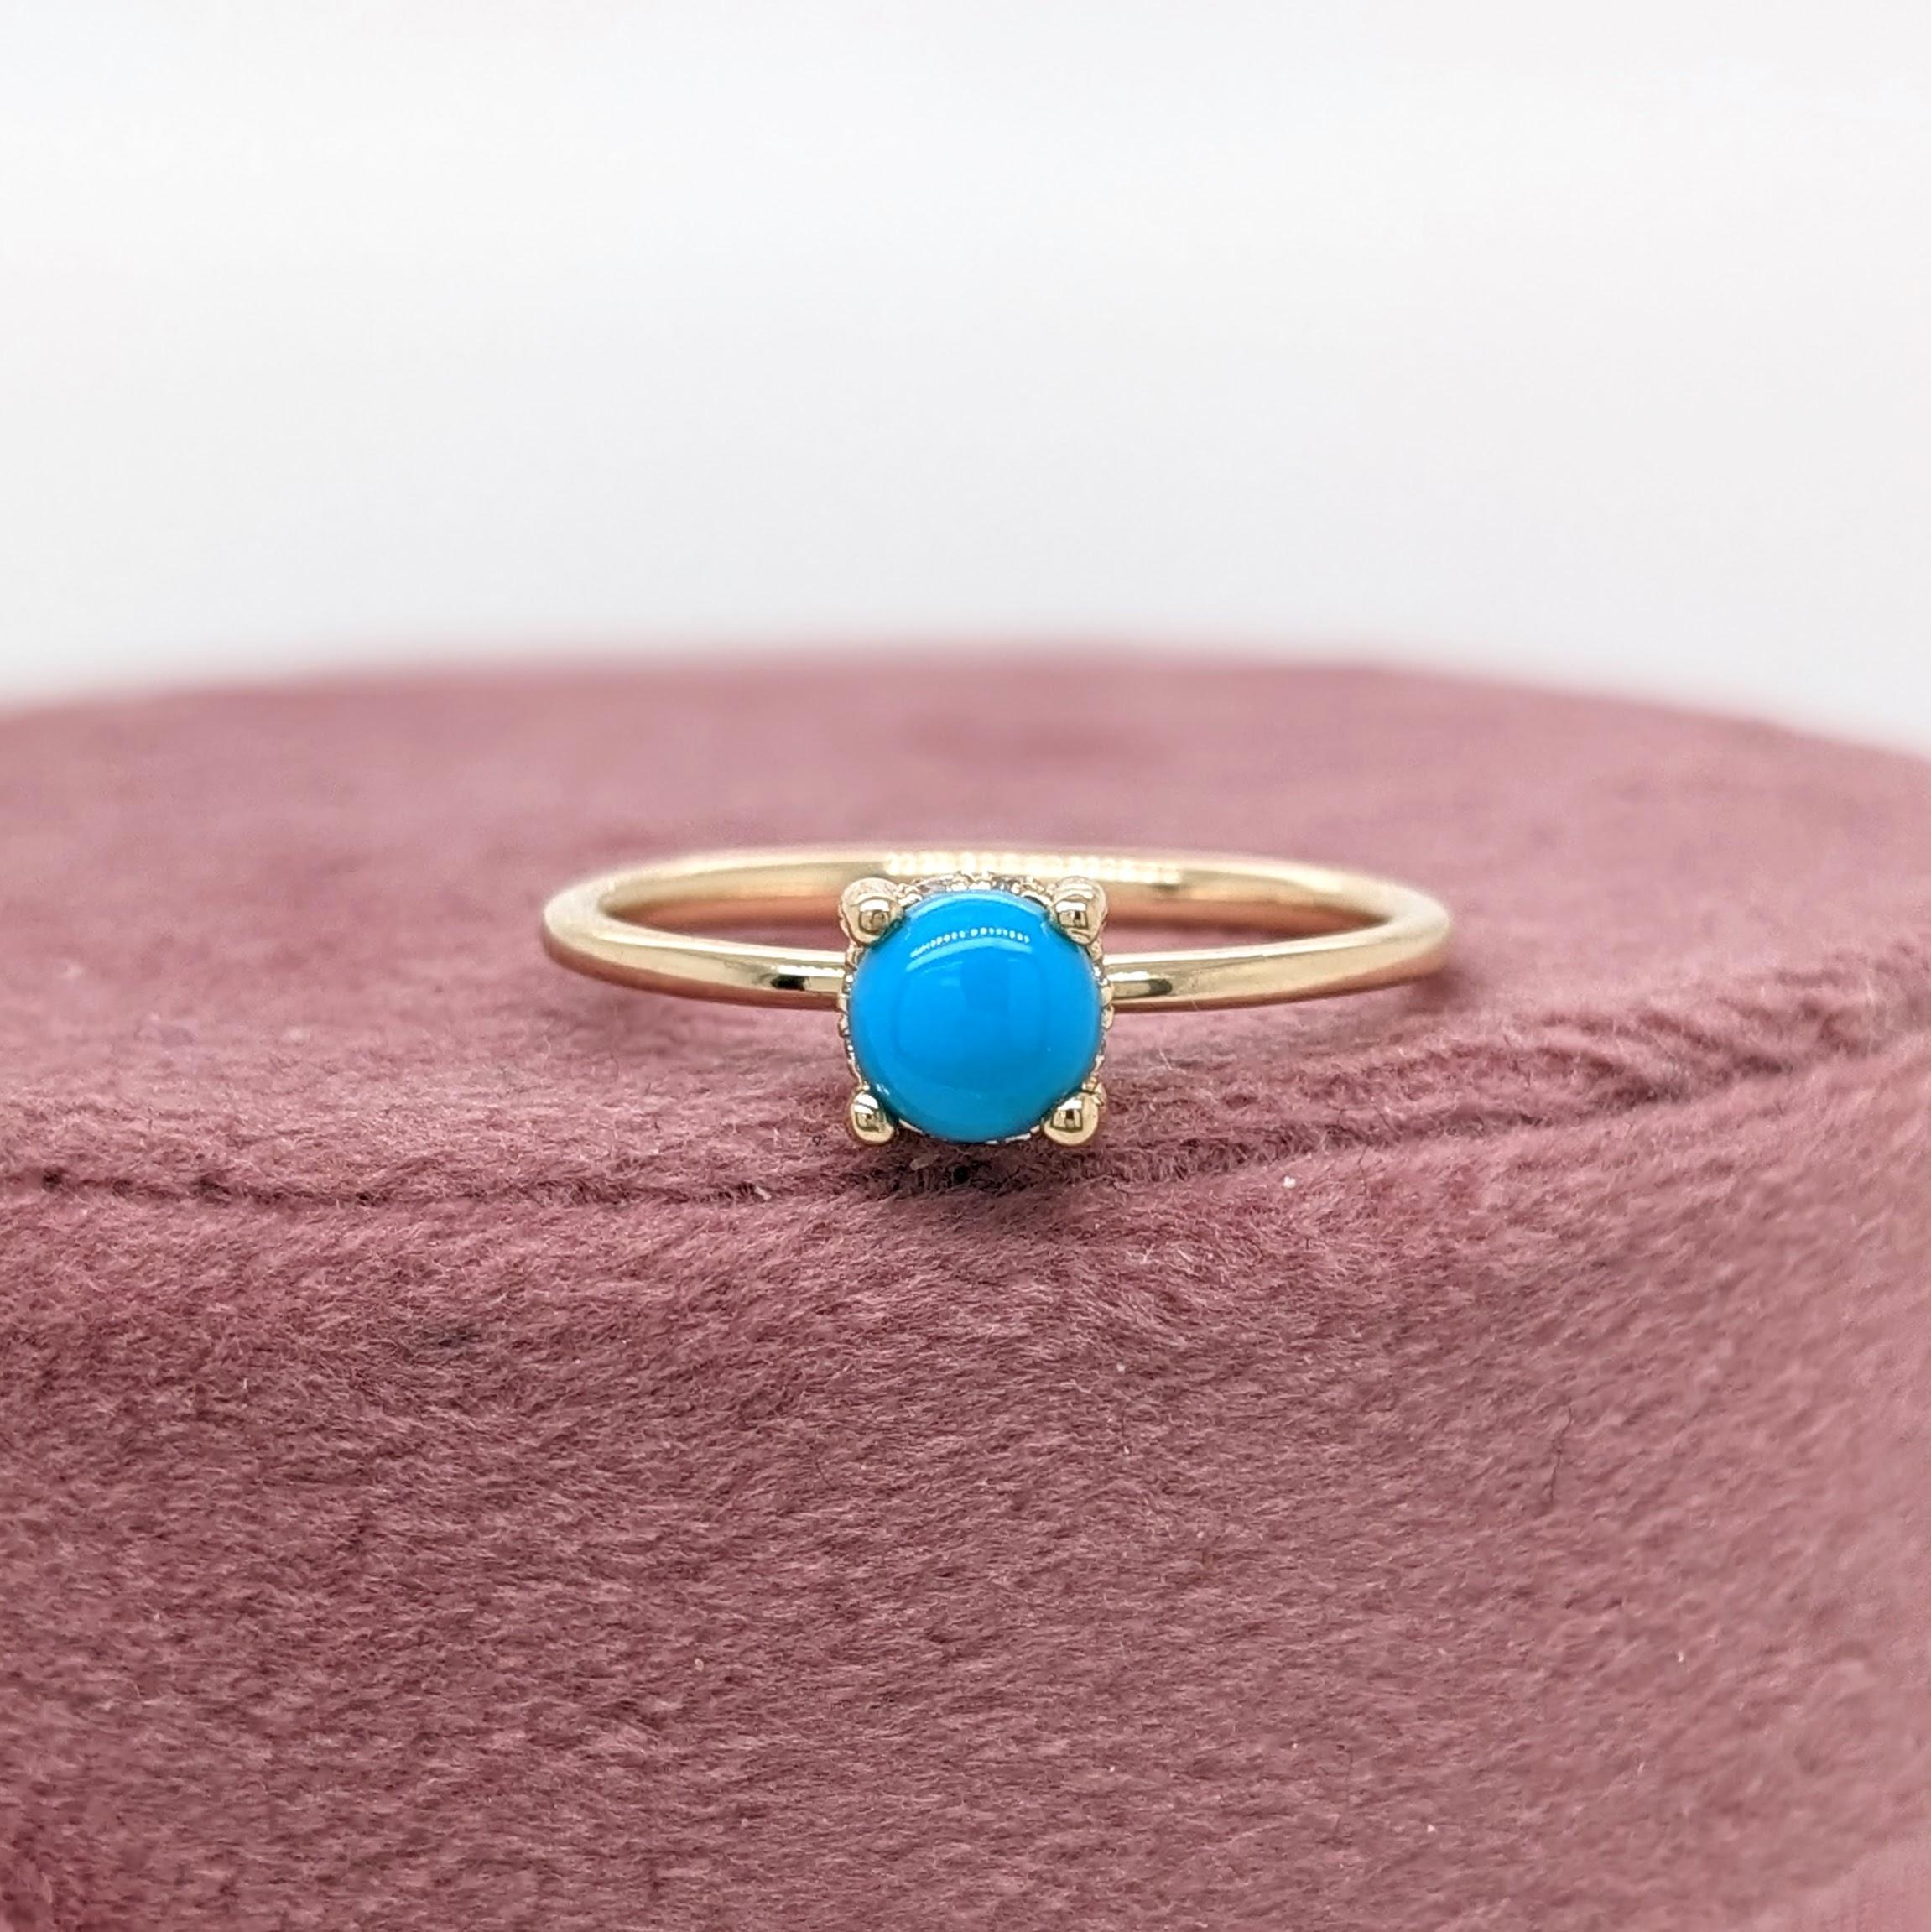 Round Cut Turquoise Ring w Earth Mined Diamonds in Solid 14K Yellow Gold Round 5mm